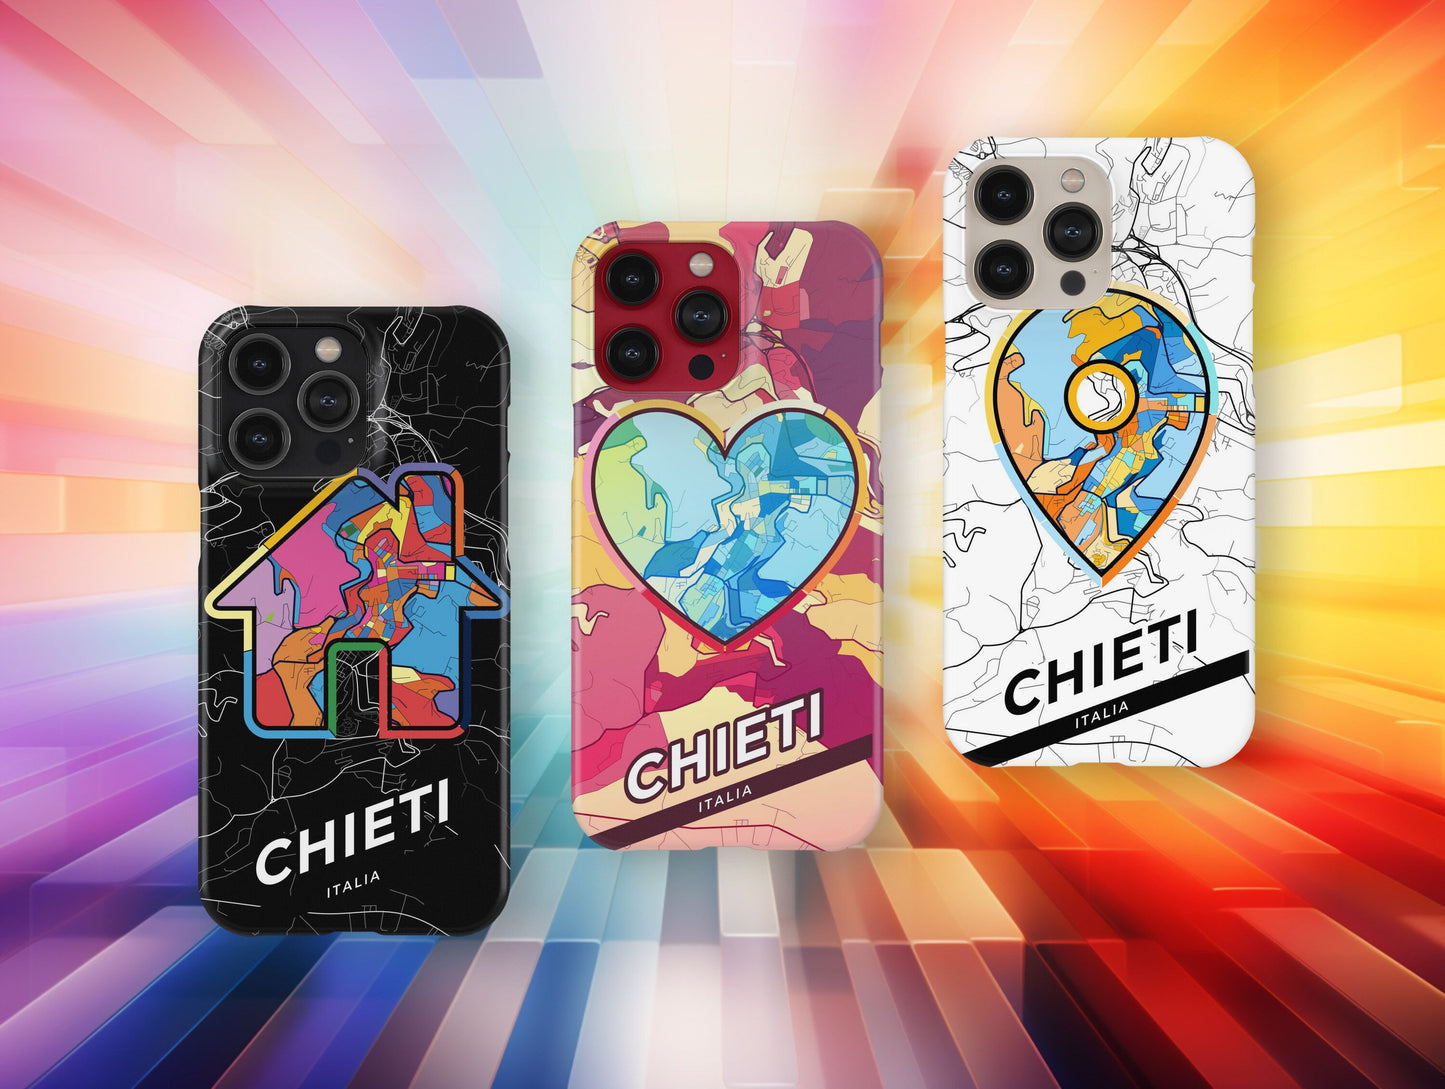 Chieti Italy slim phone case with colorful icon. Birthday, wedding or housewarming gift. Couple match cases.